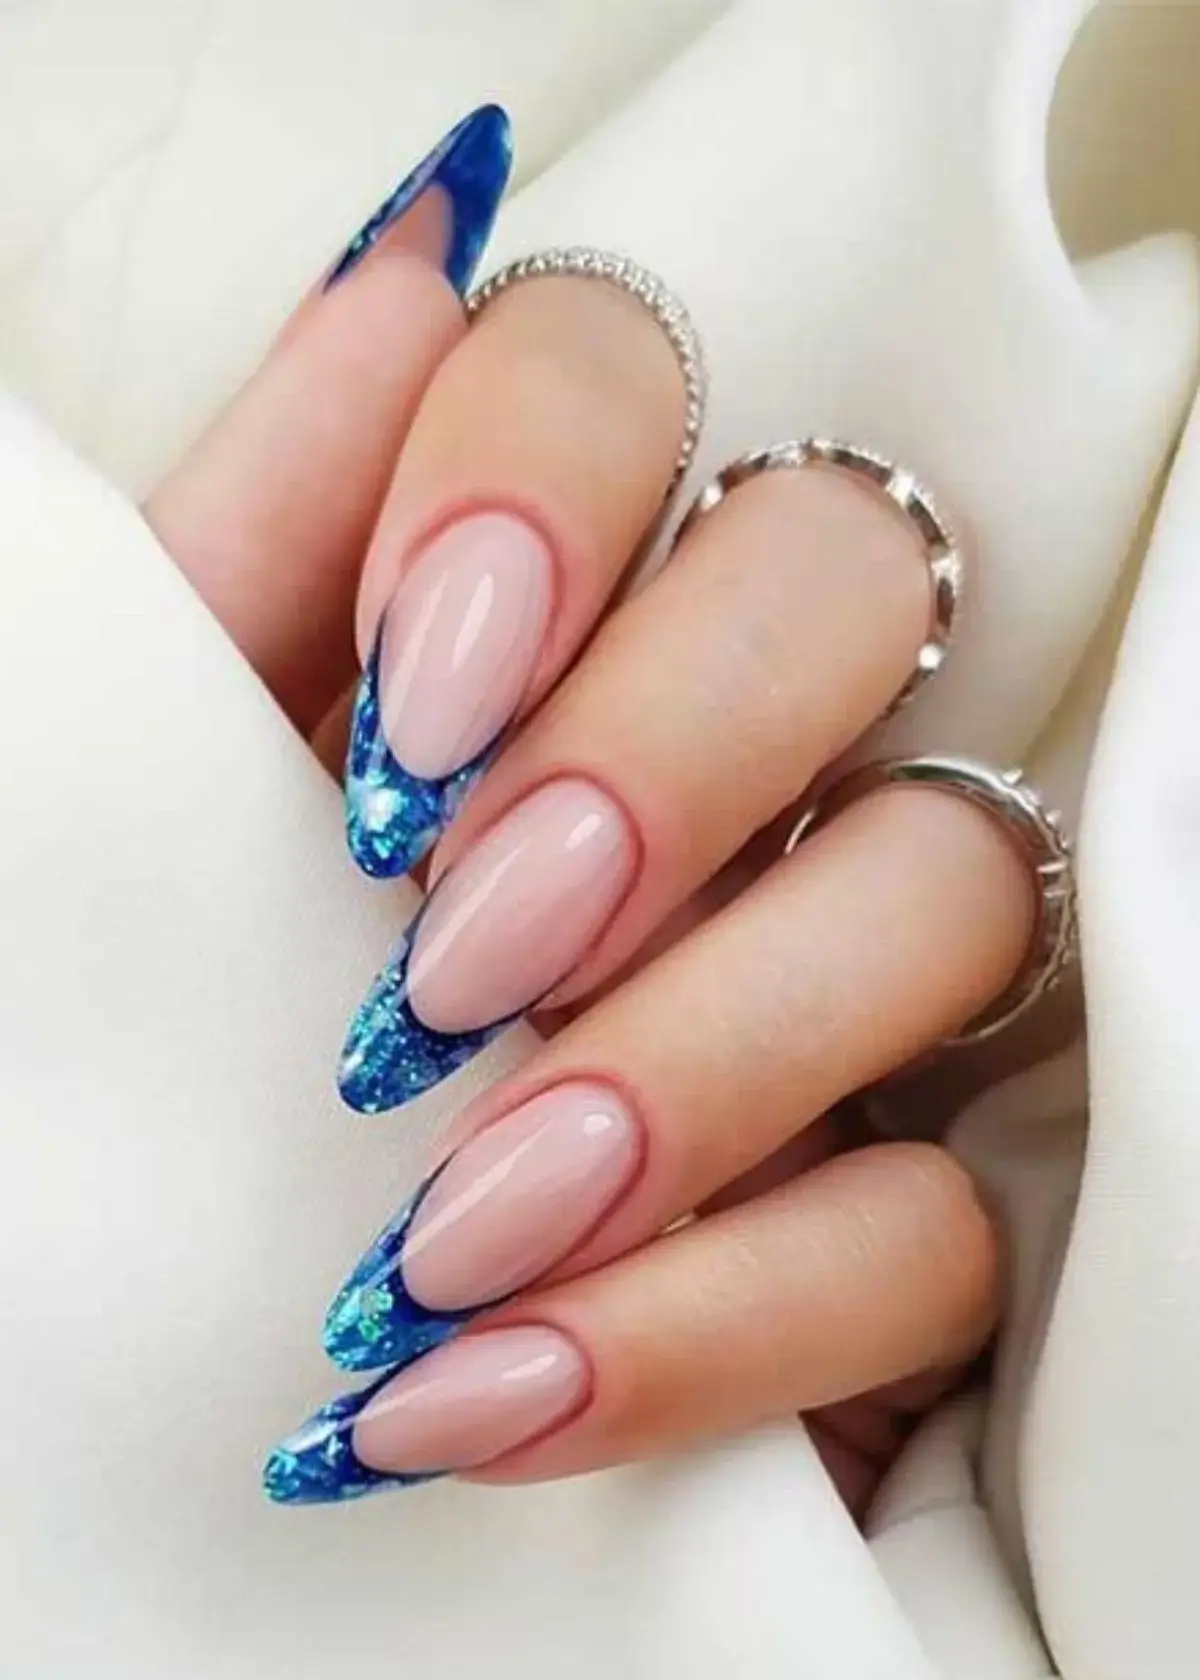 How to choose the best french manicure kit?